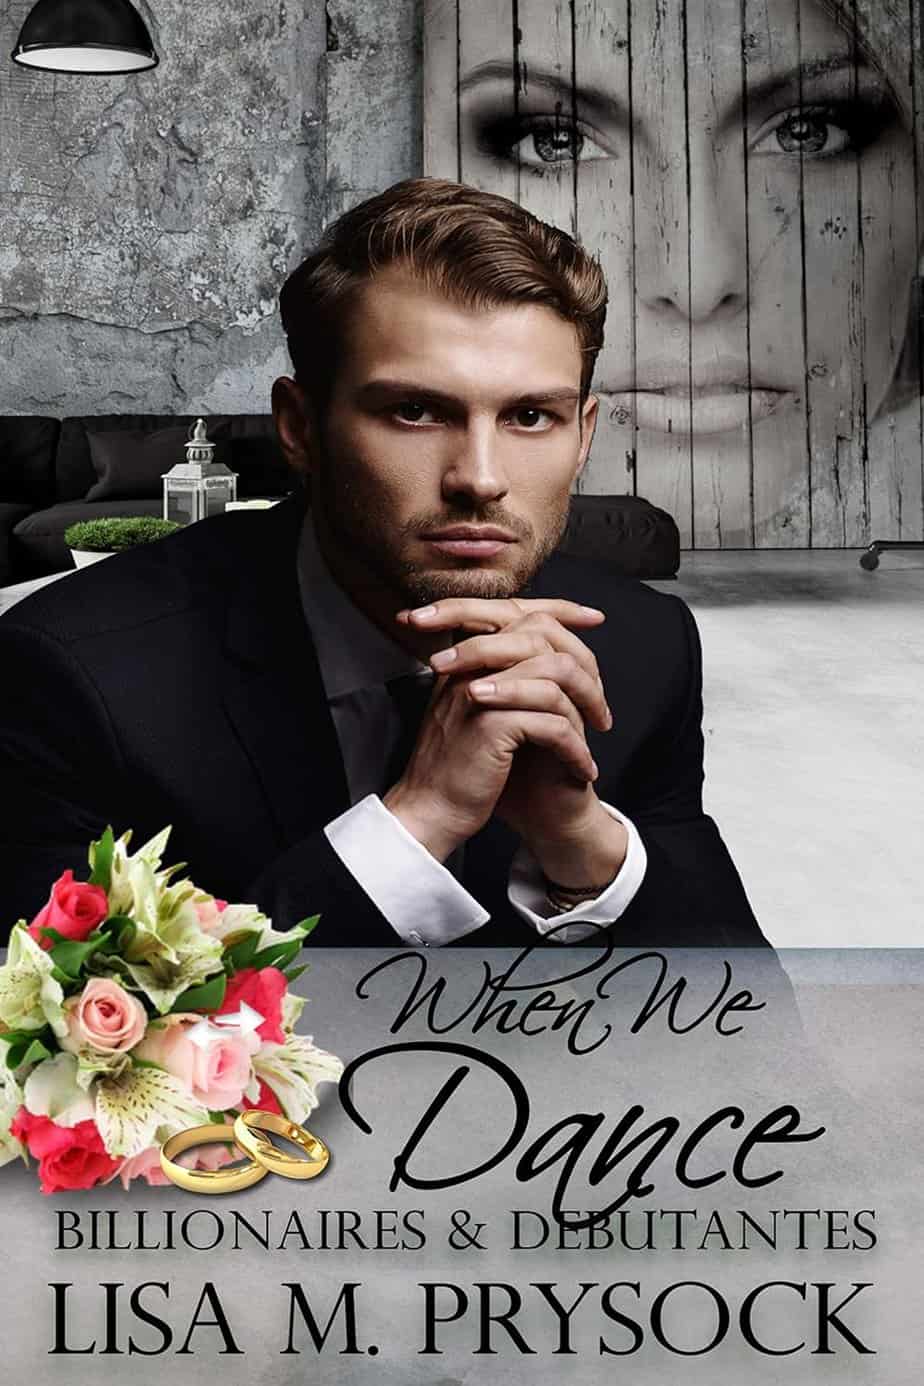 Cover image for When We Dance by Lisa Prysock, a billionaire & debutante faith-inspired, Christian Contemporary, sweet romance novella.